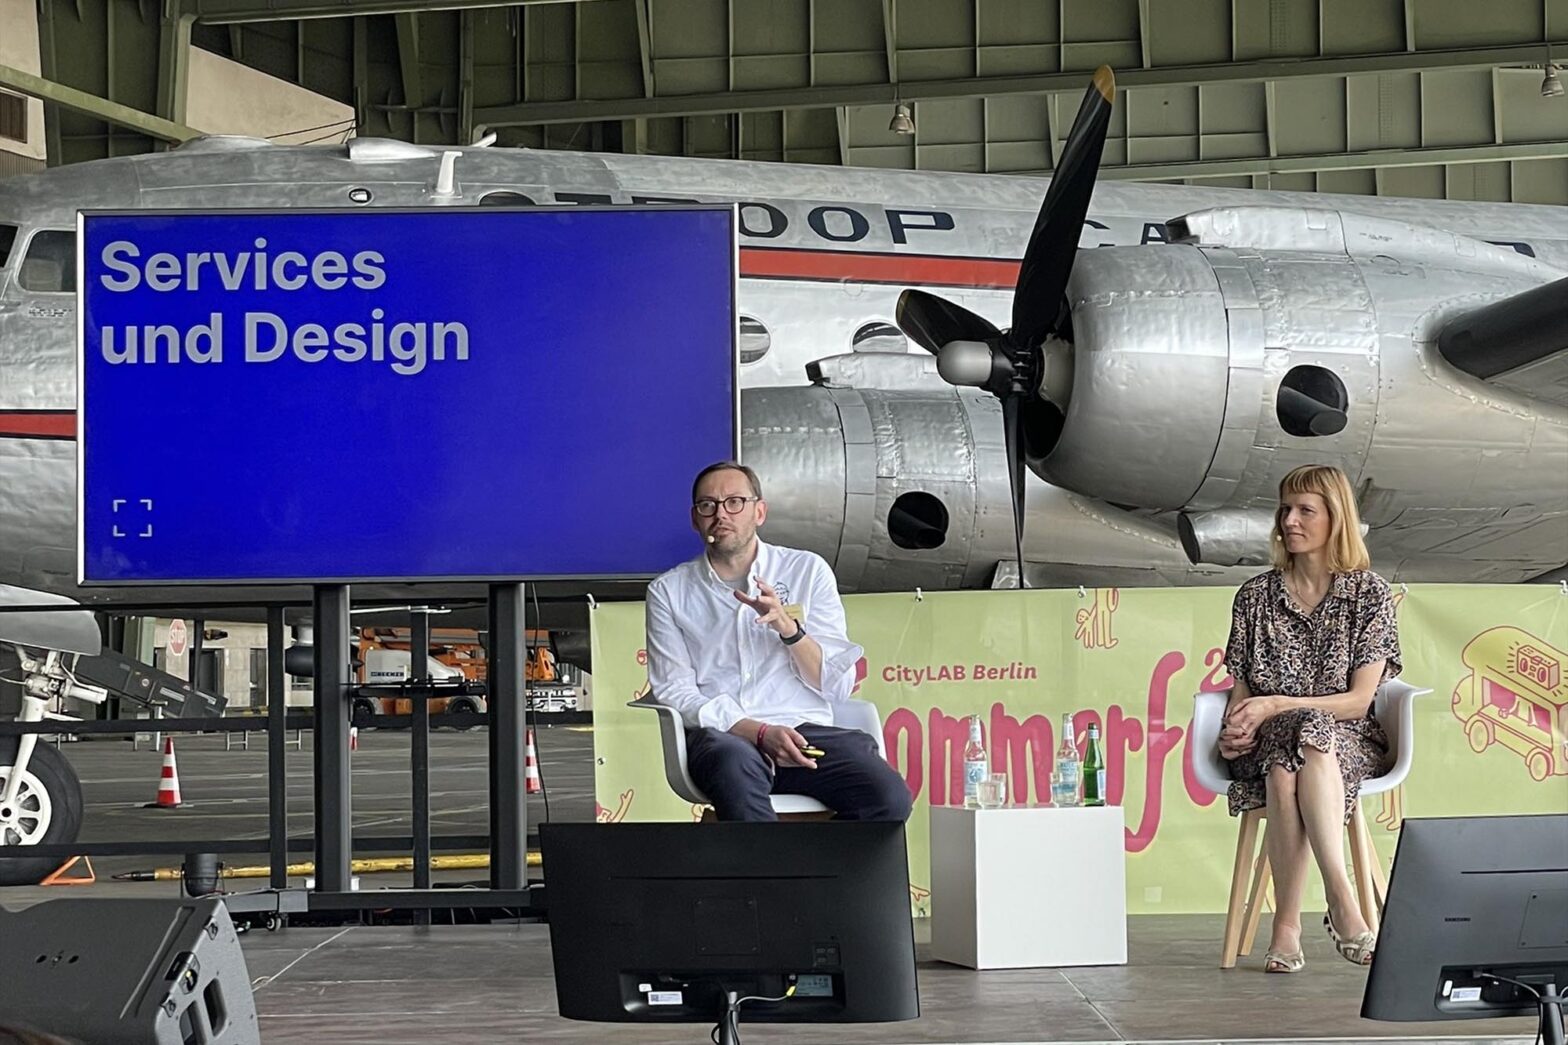 Two white people, a man and a woman, on a conference stage with a big screen behind them saying ‘Services and Design’ in German; an airplane is standing right behind them, a banner in the background says ‘CityLAB Berlin summer festival’